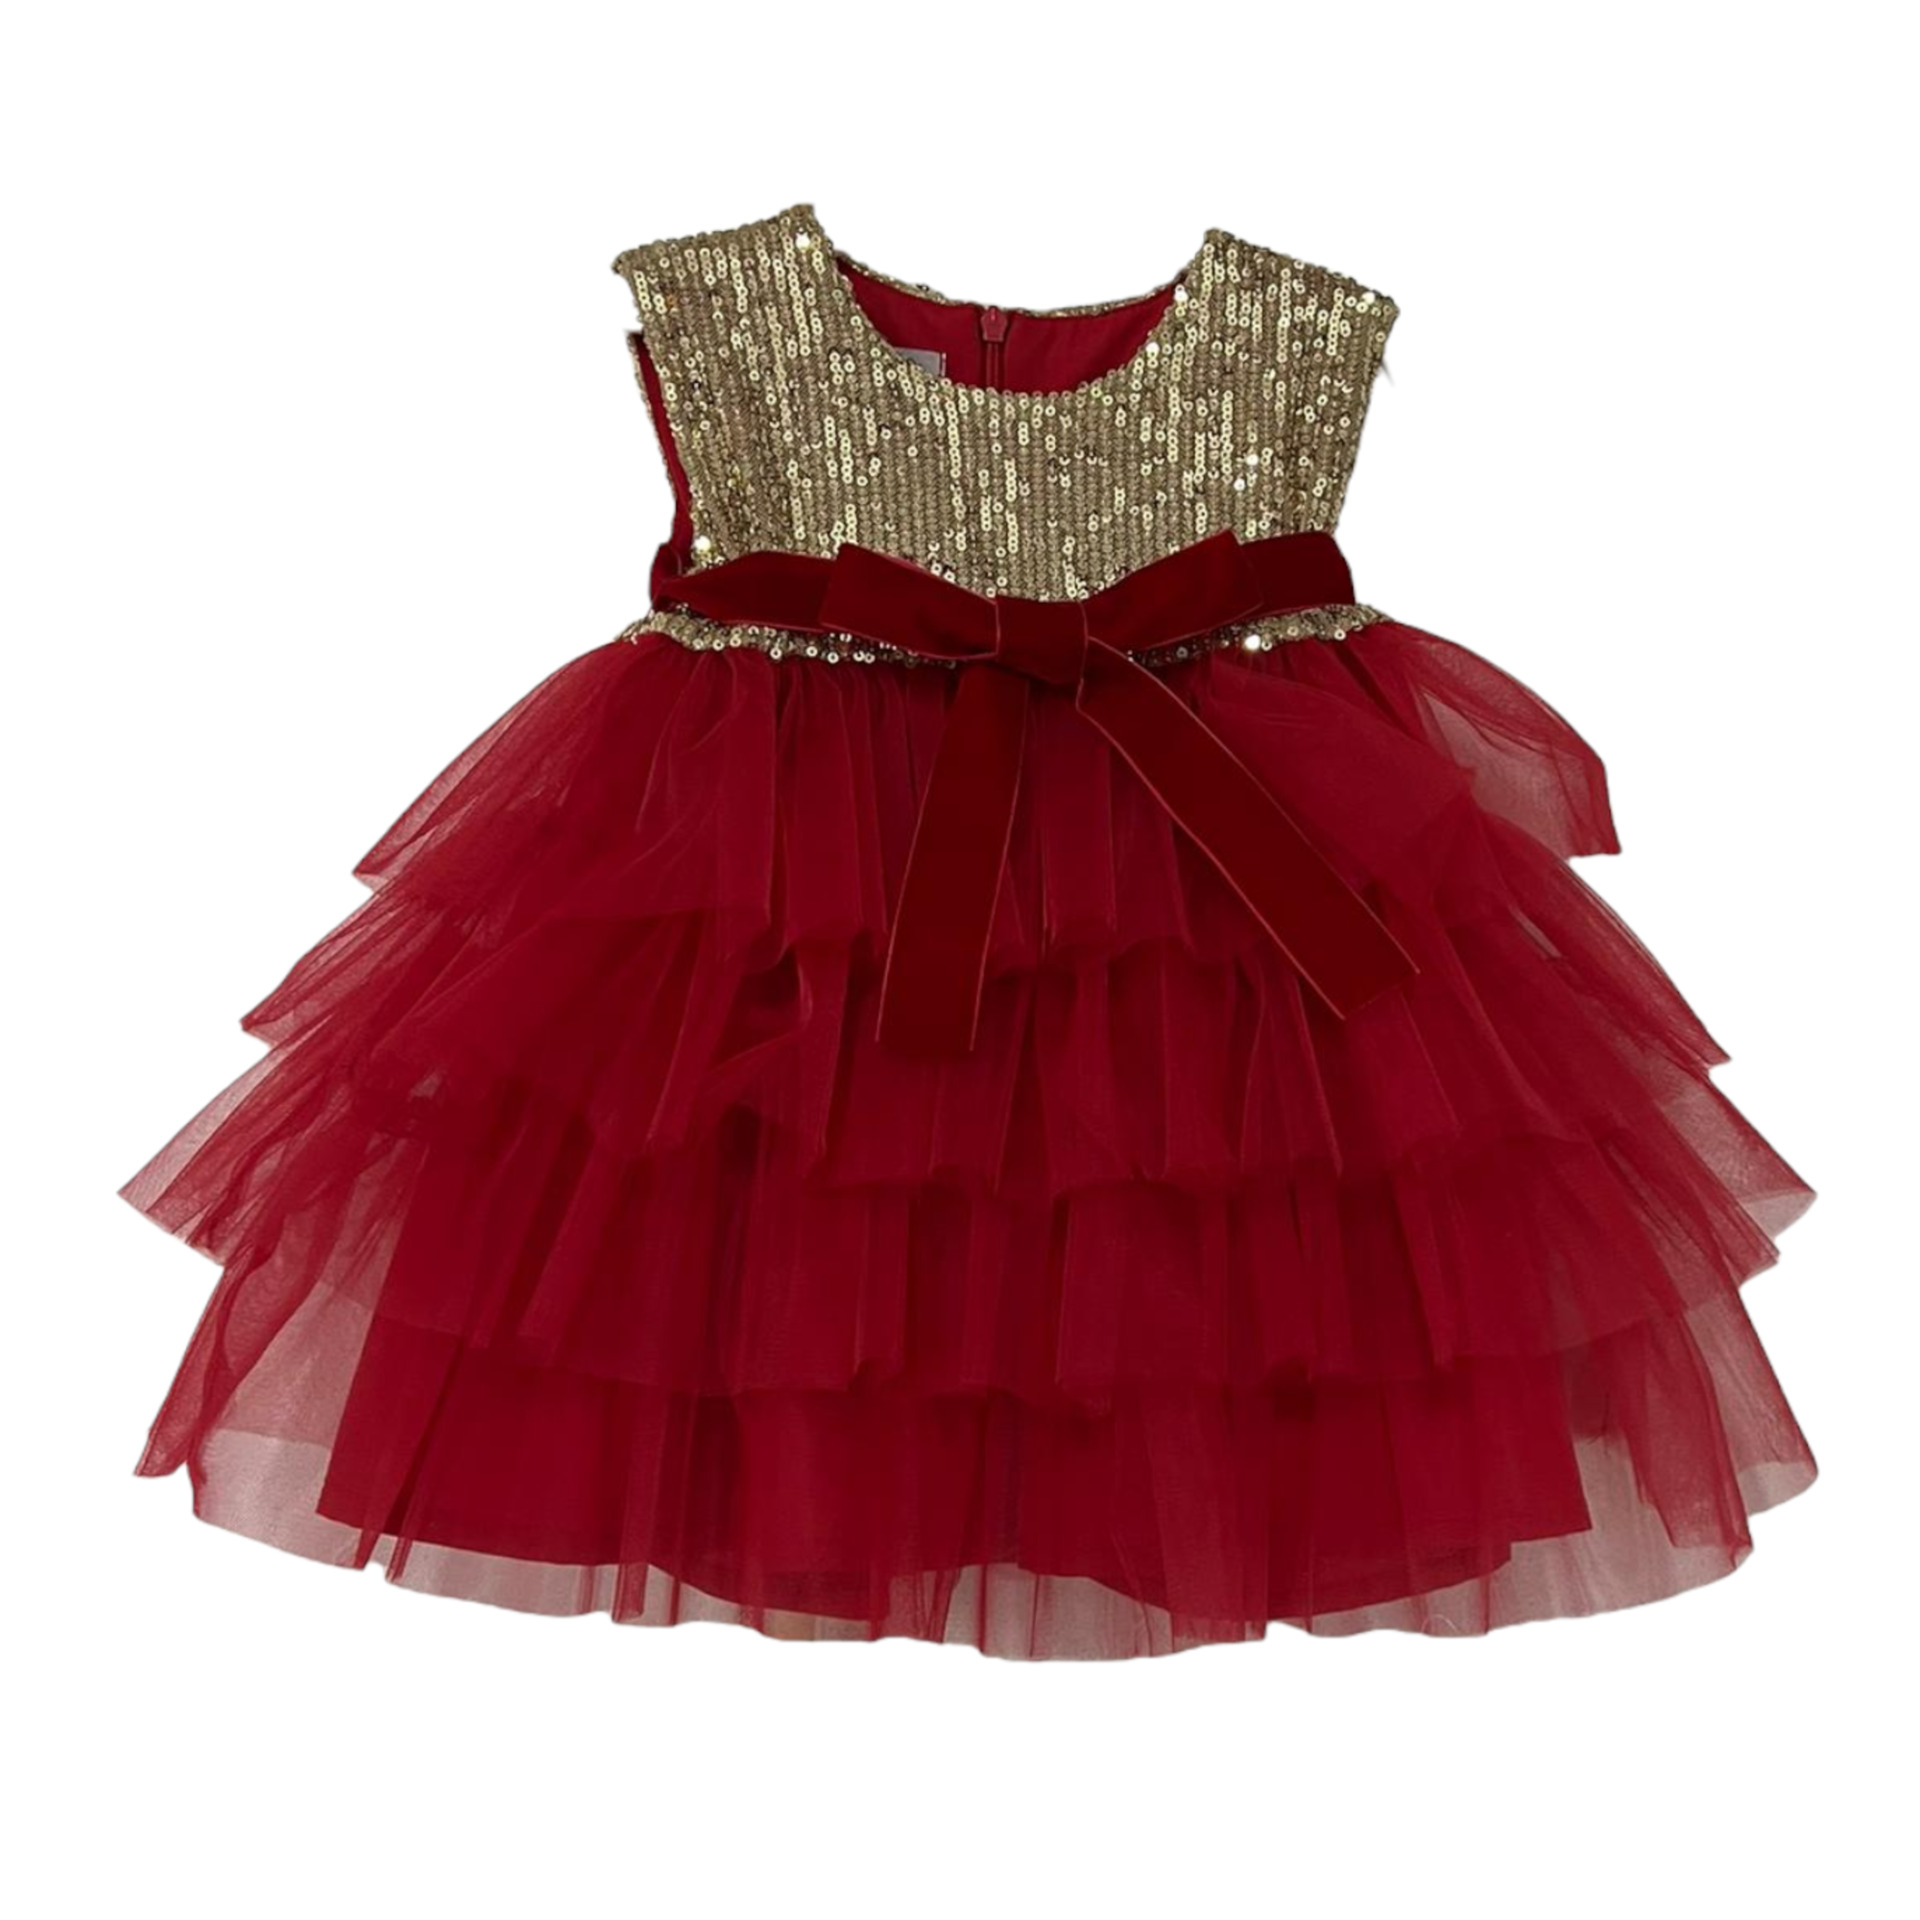 Sequins and red tule dress